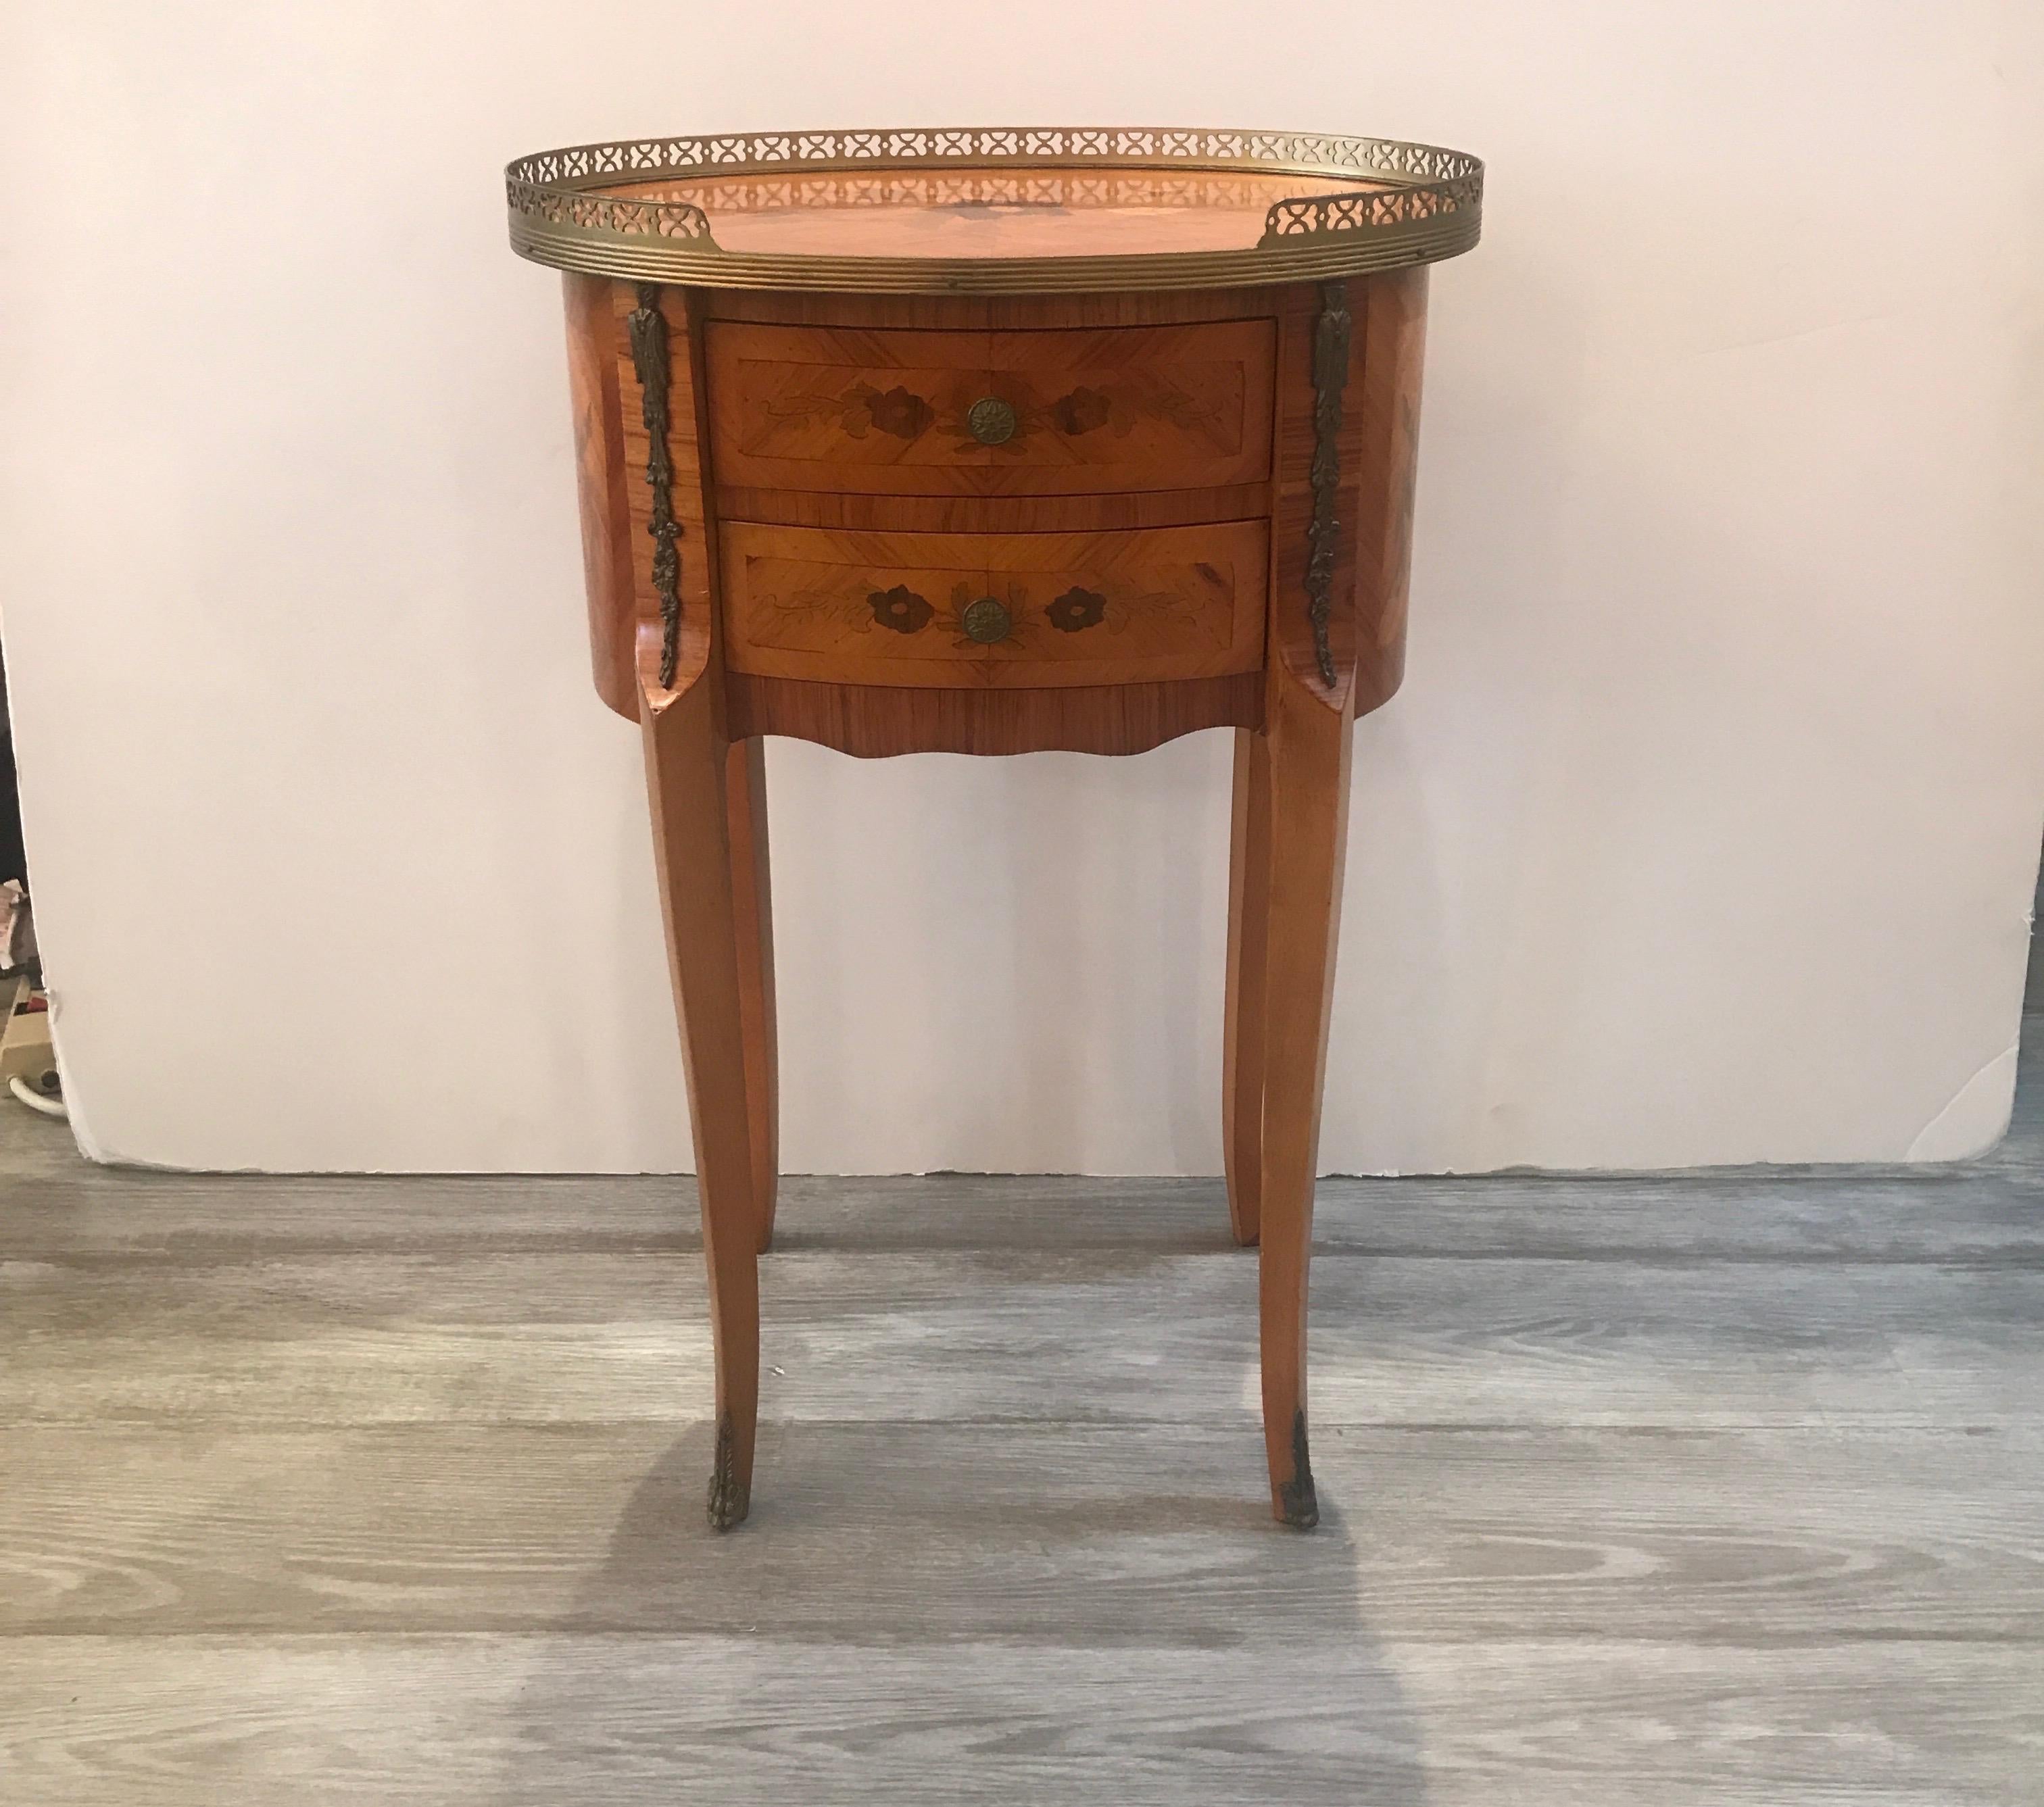 A beautiful inlaid oval side table with drawers. The reticulated gallery edge top with inlaid decoration on the top of satinwood, king’s wood and tulip wood. The inlay is repeated on the finished back with four gracefully curved legs.